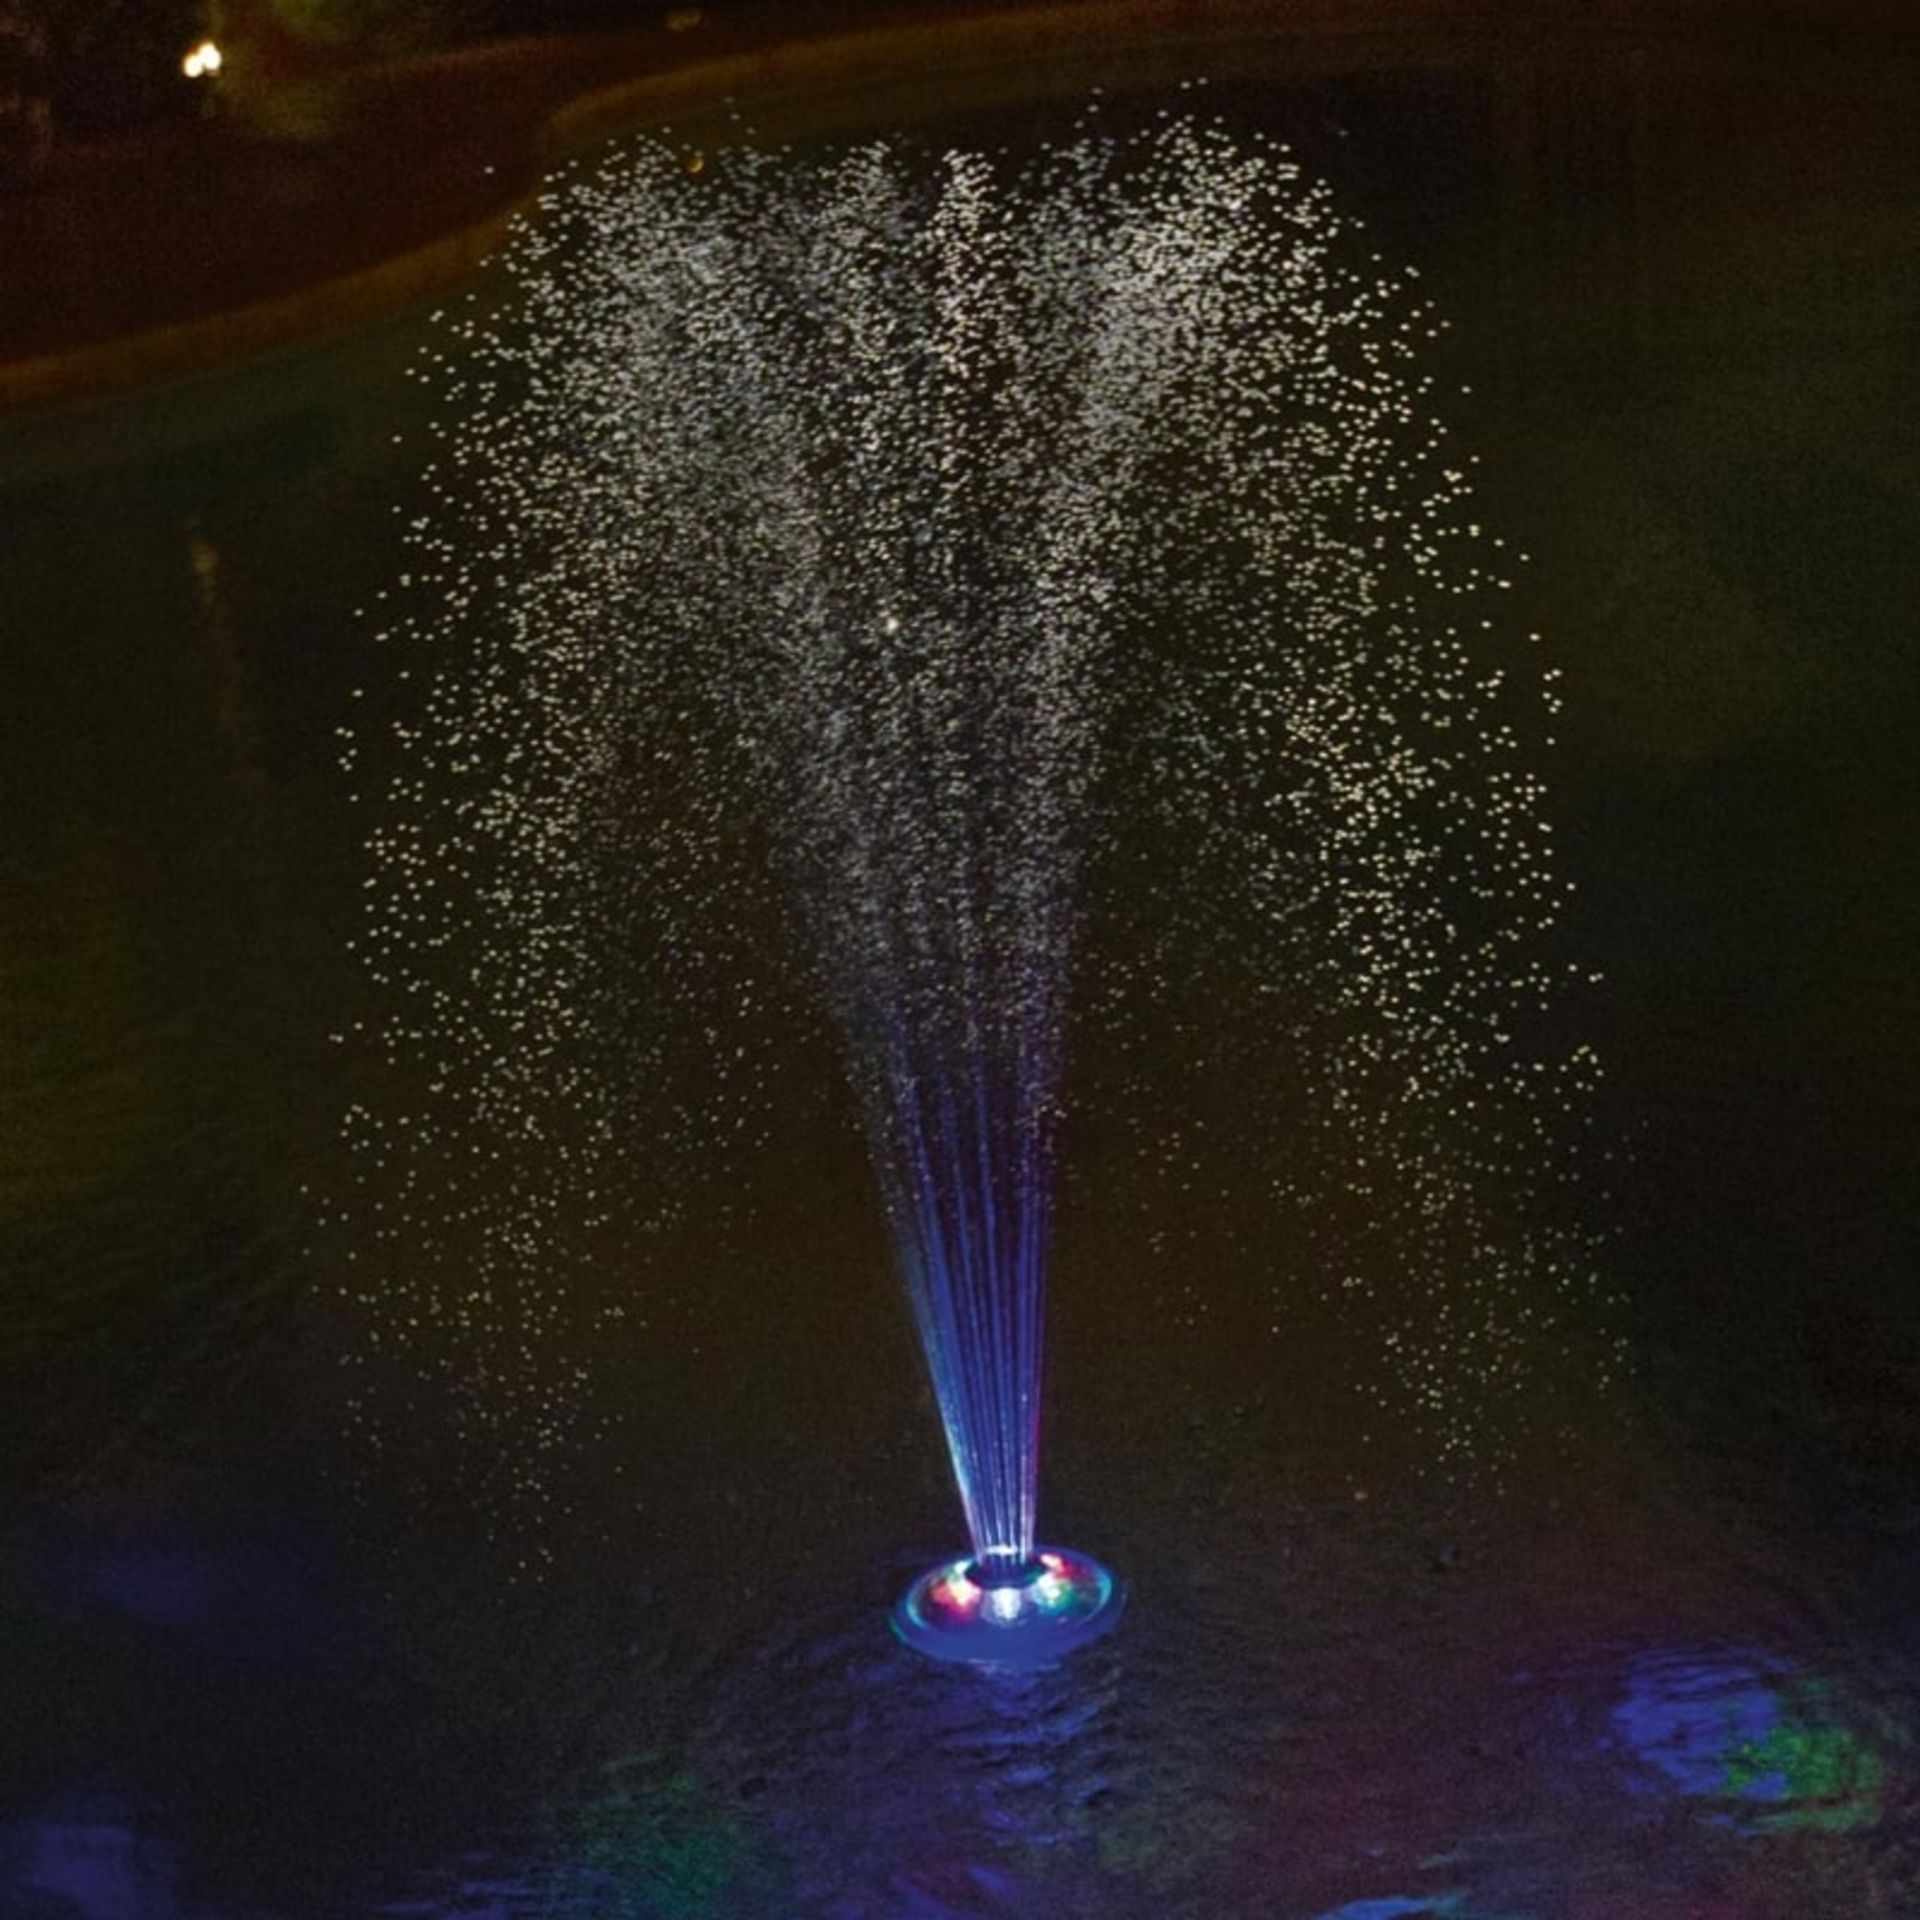 10 x Bestway Flowclear Floating Pool Fountain Accessory | 58493 - Image 2 of 2